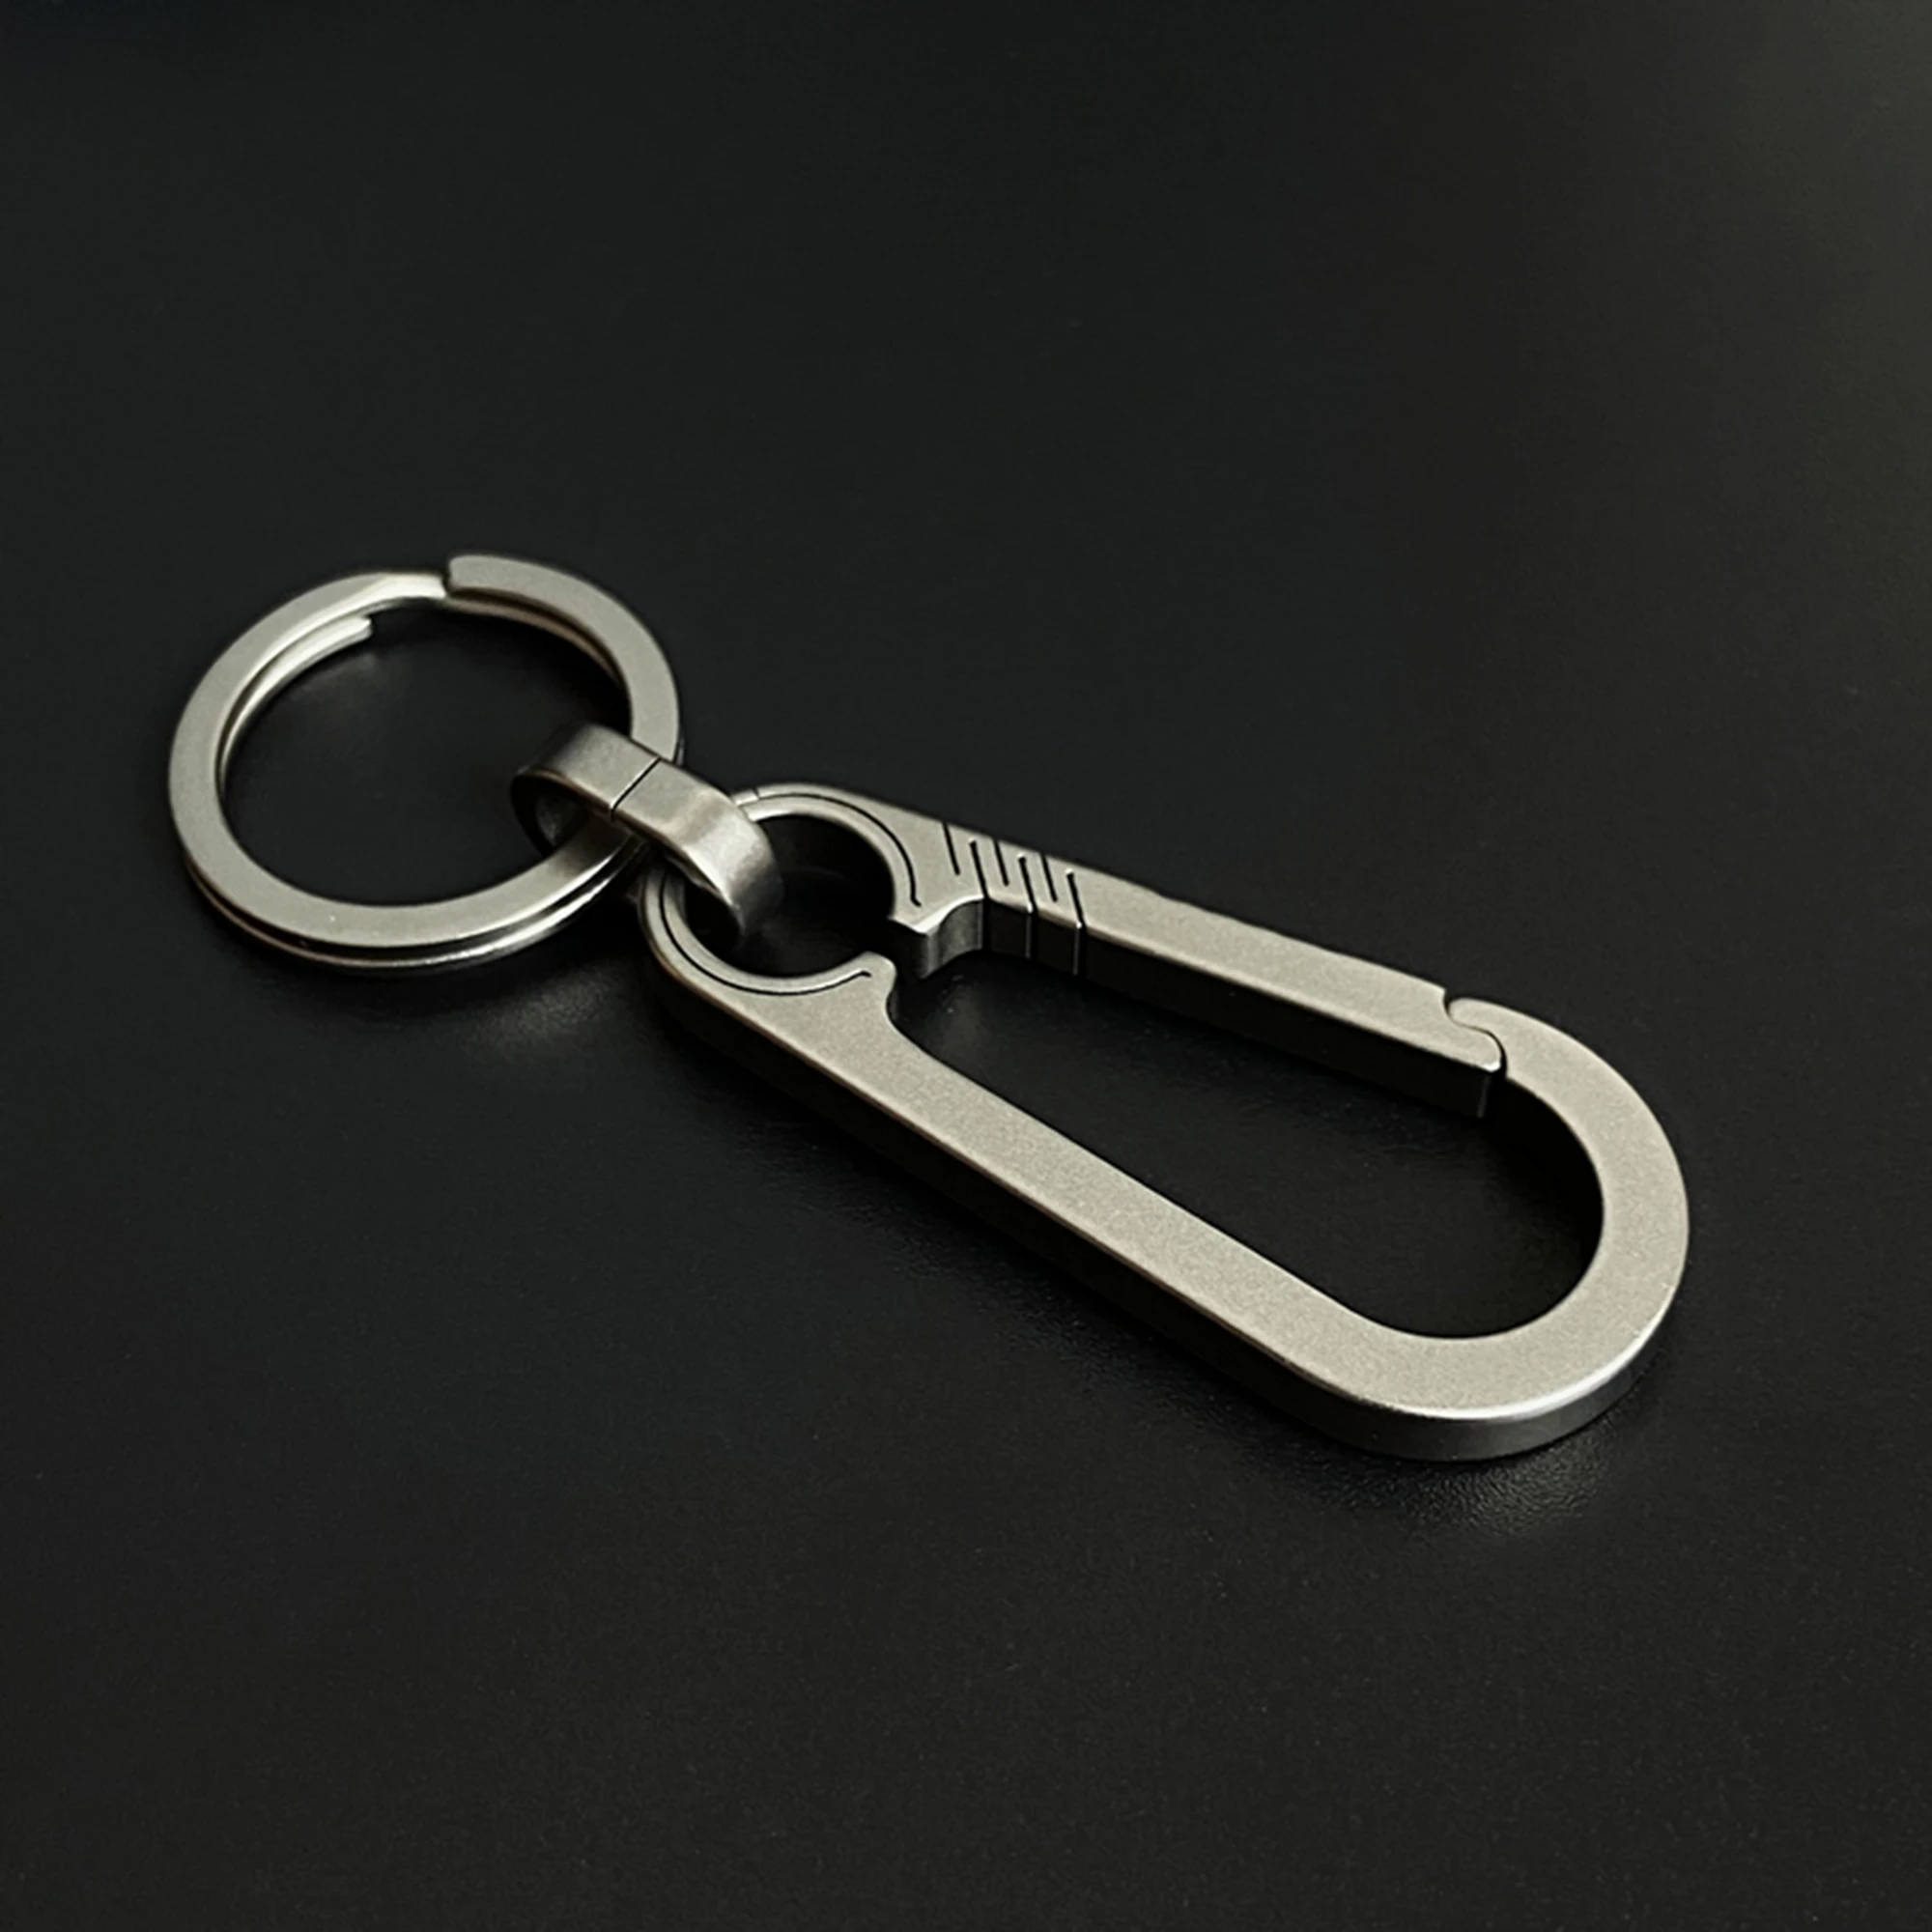 Dodge Challenger Silver Carabiner-style Snap Hook Metal Key Chain